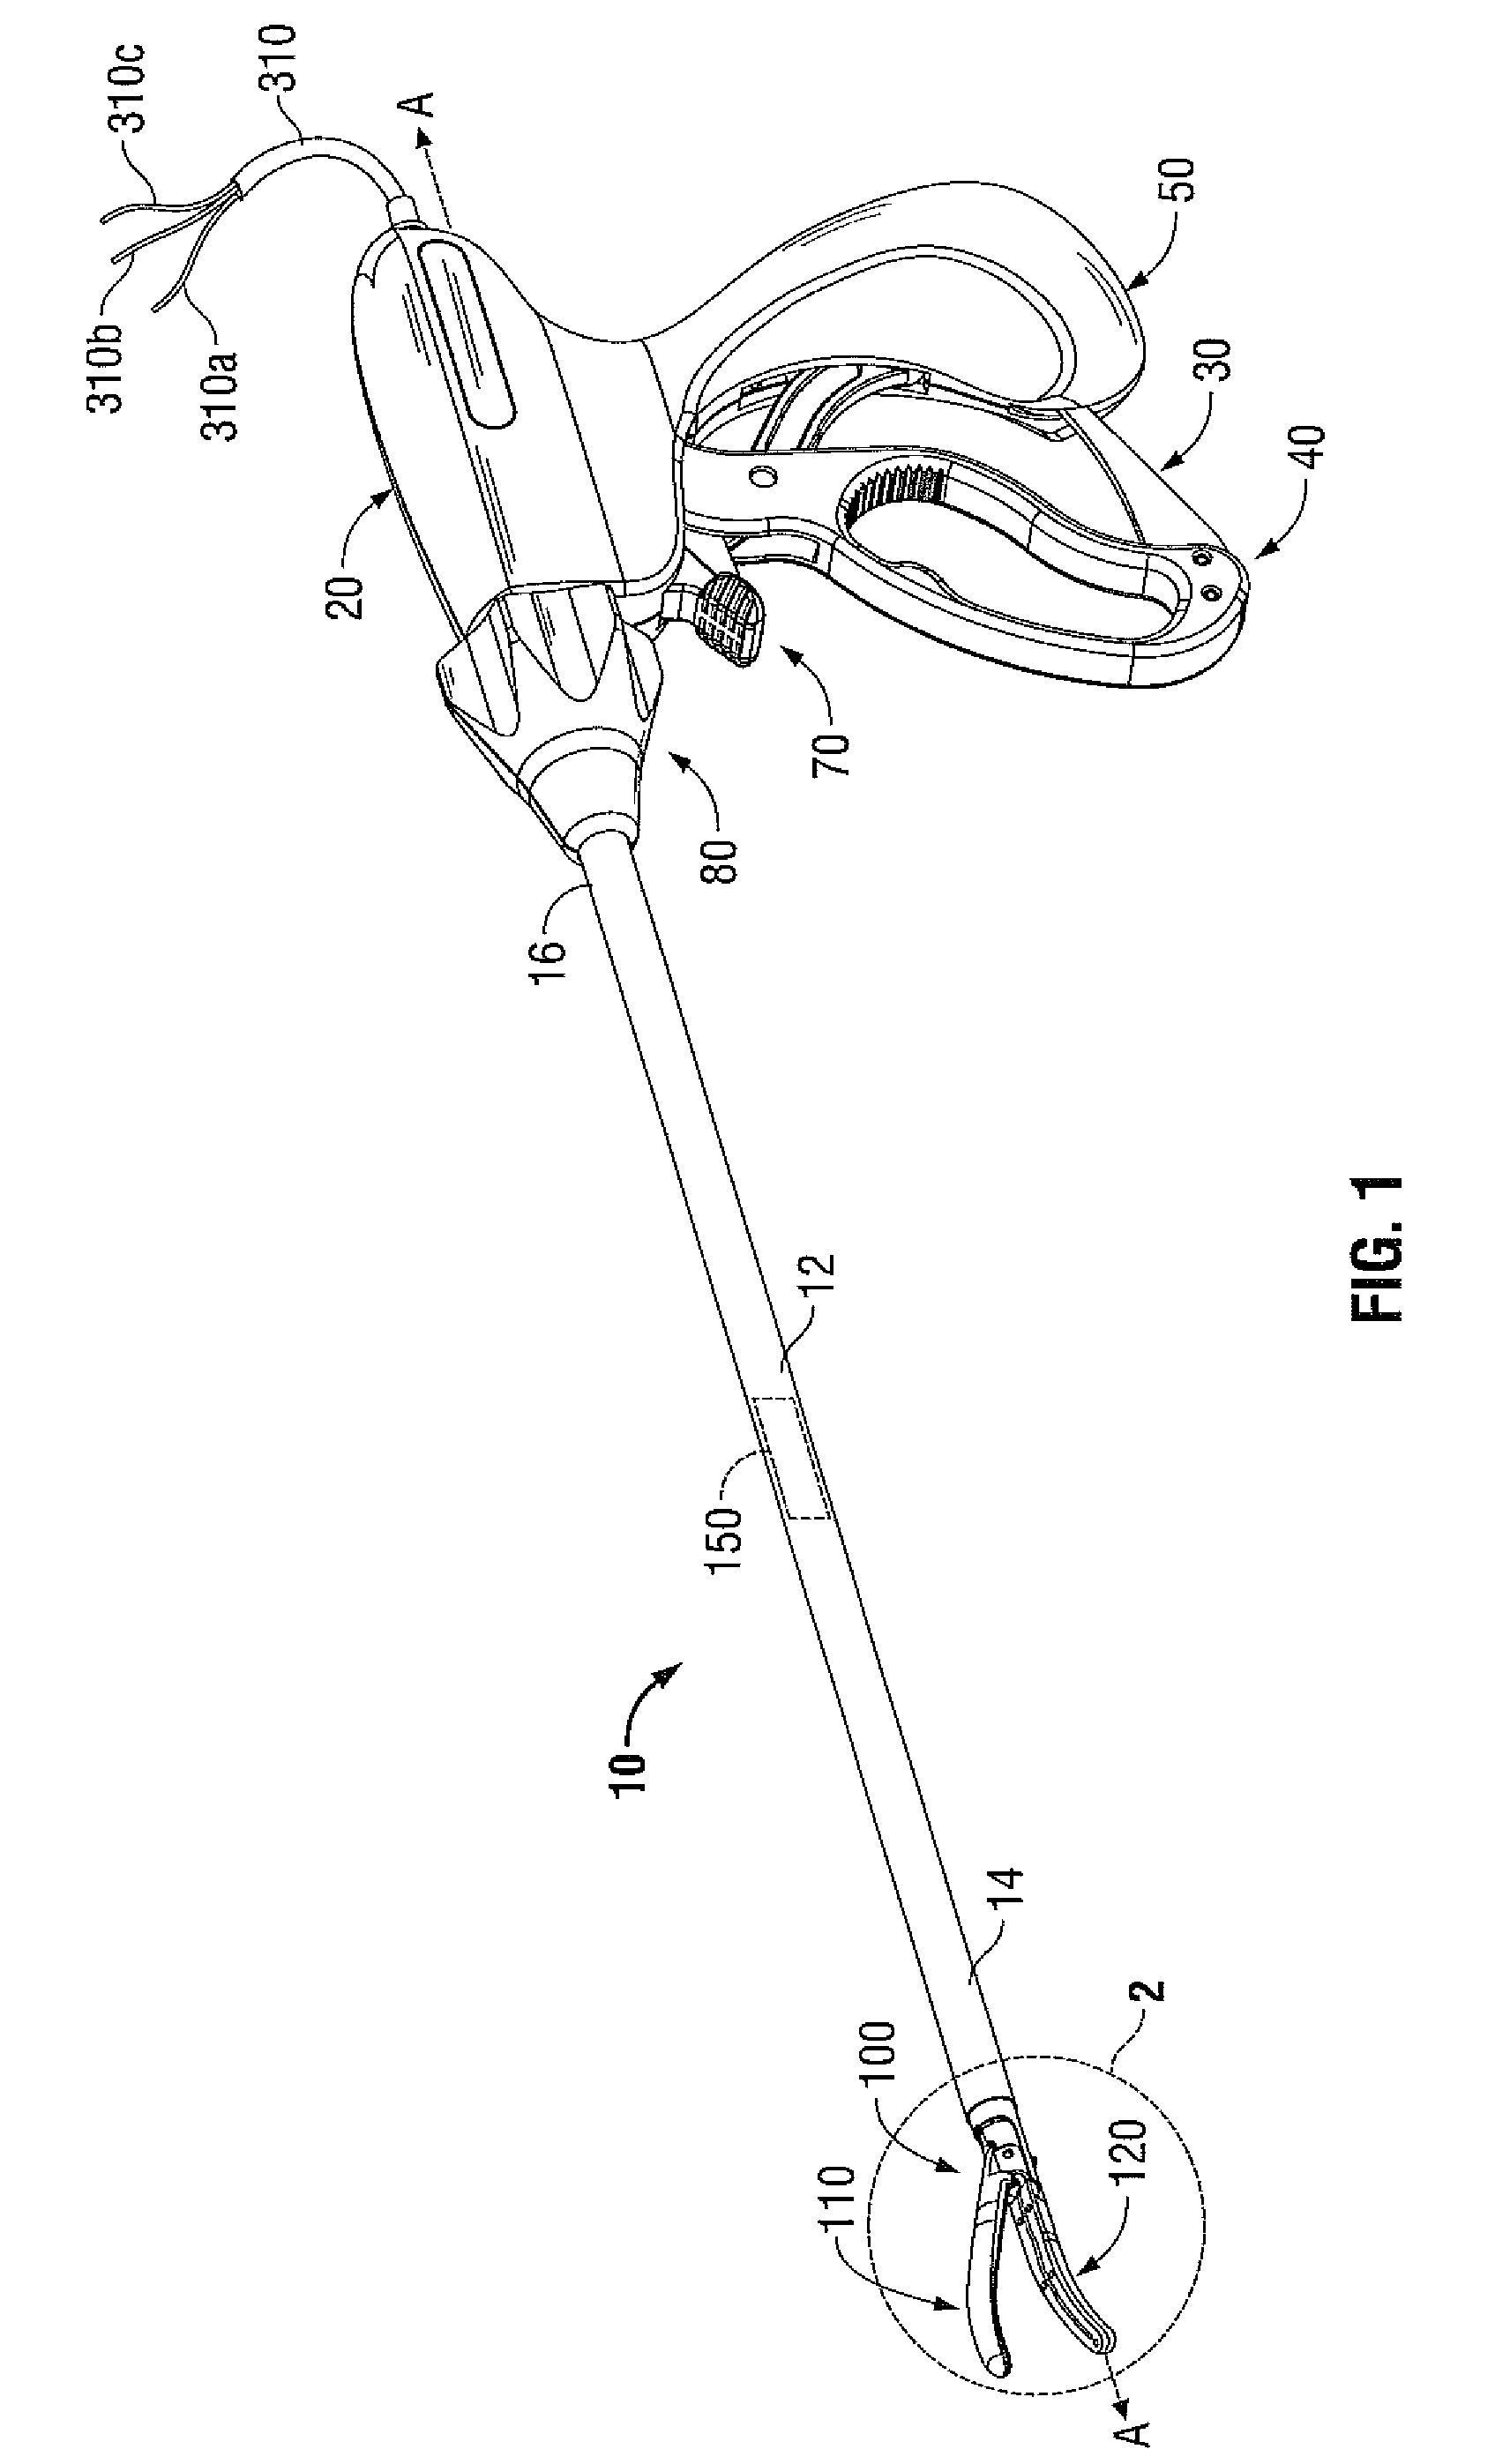 Apparatus and Method of Controlling Cutting Blade Travel Through the Use of Etched Features